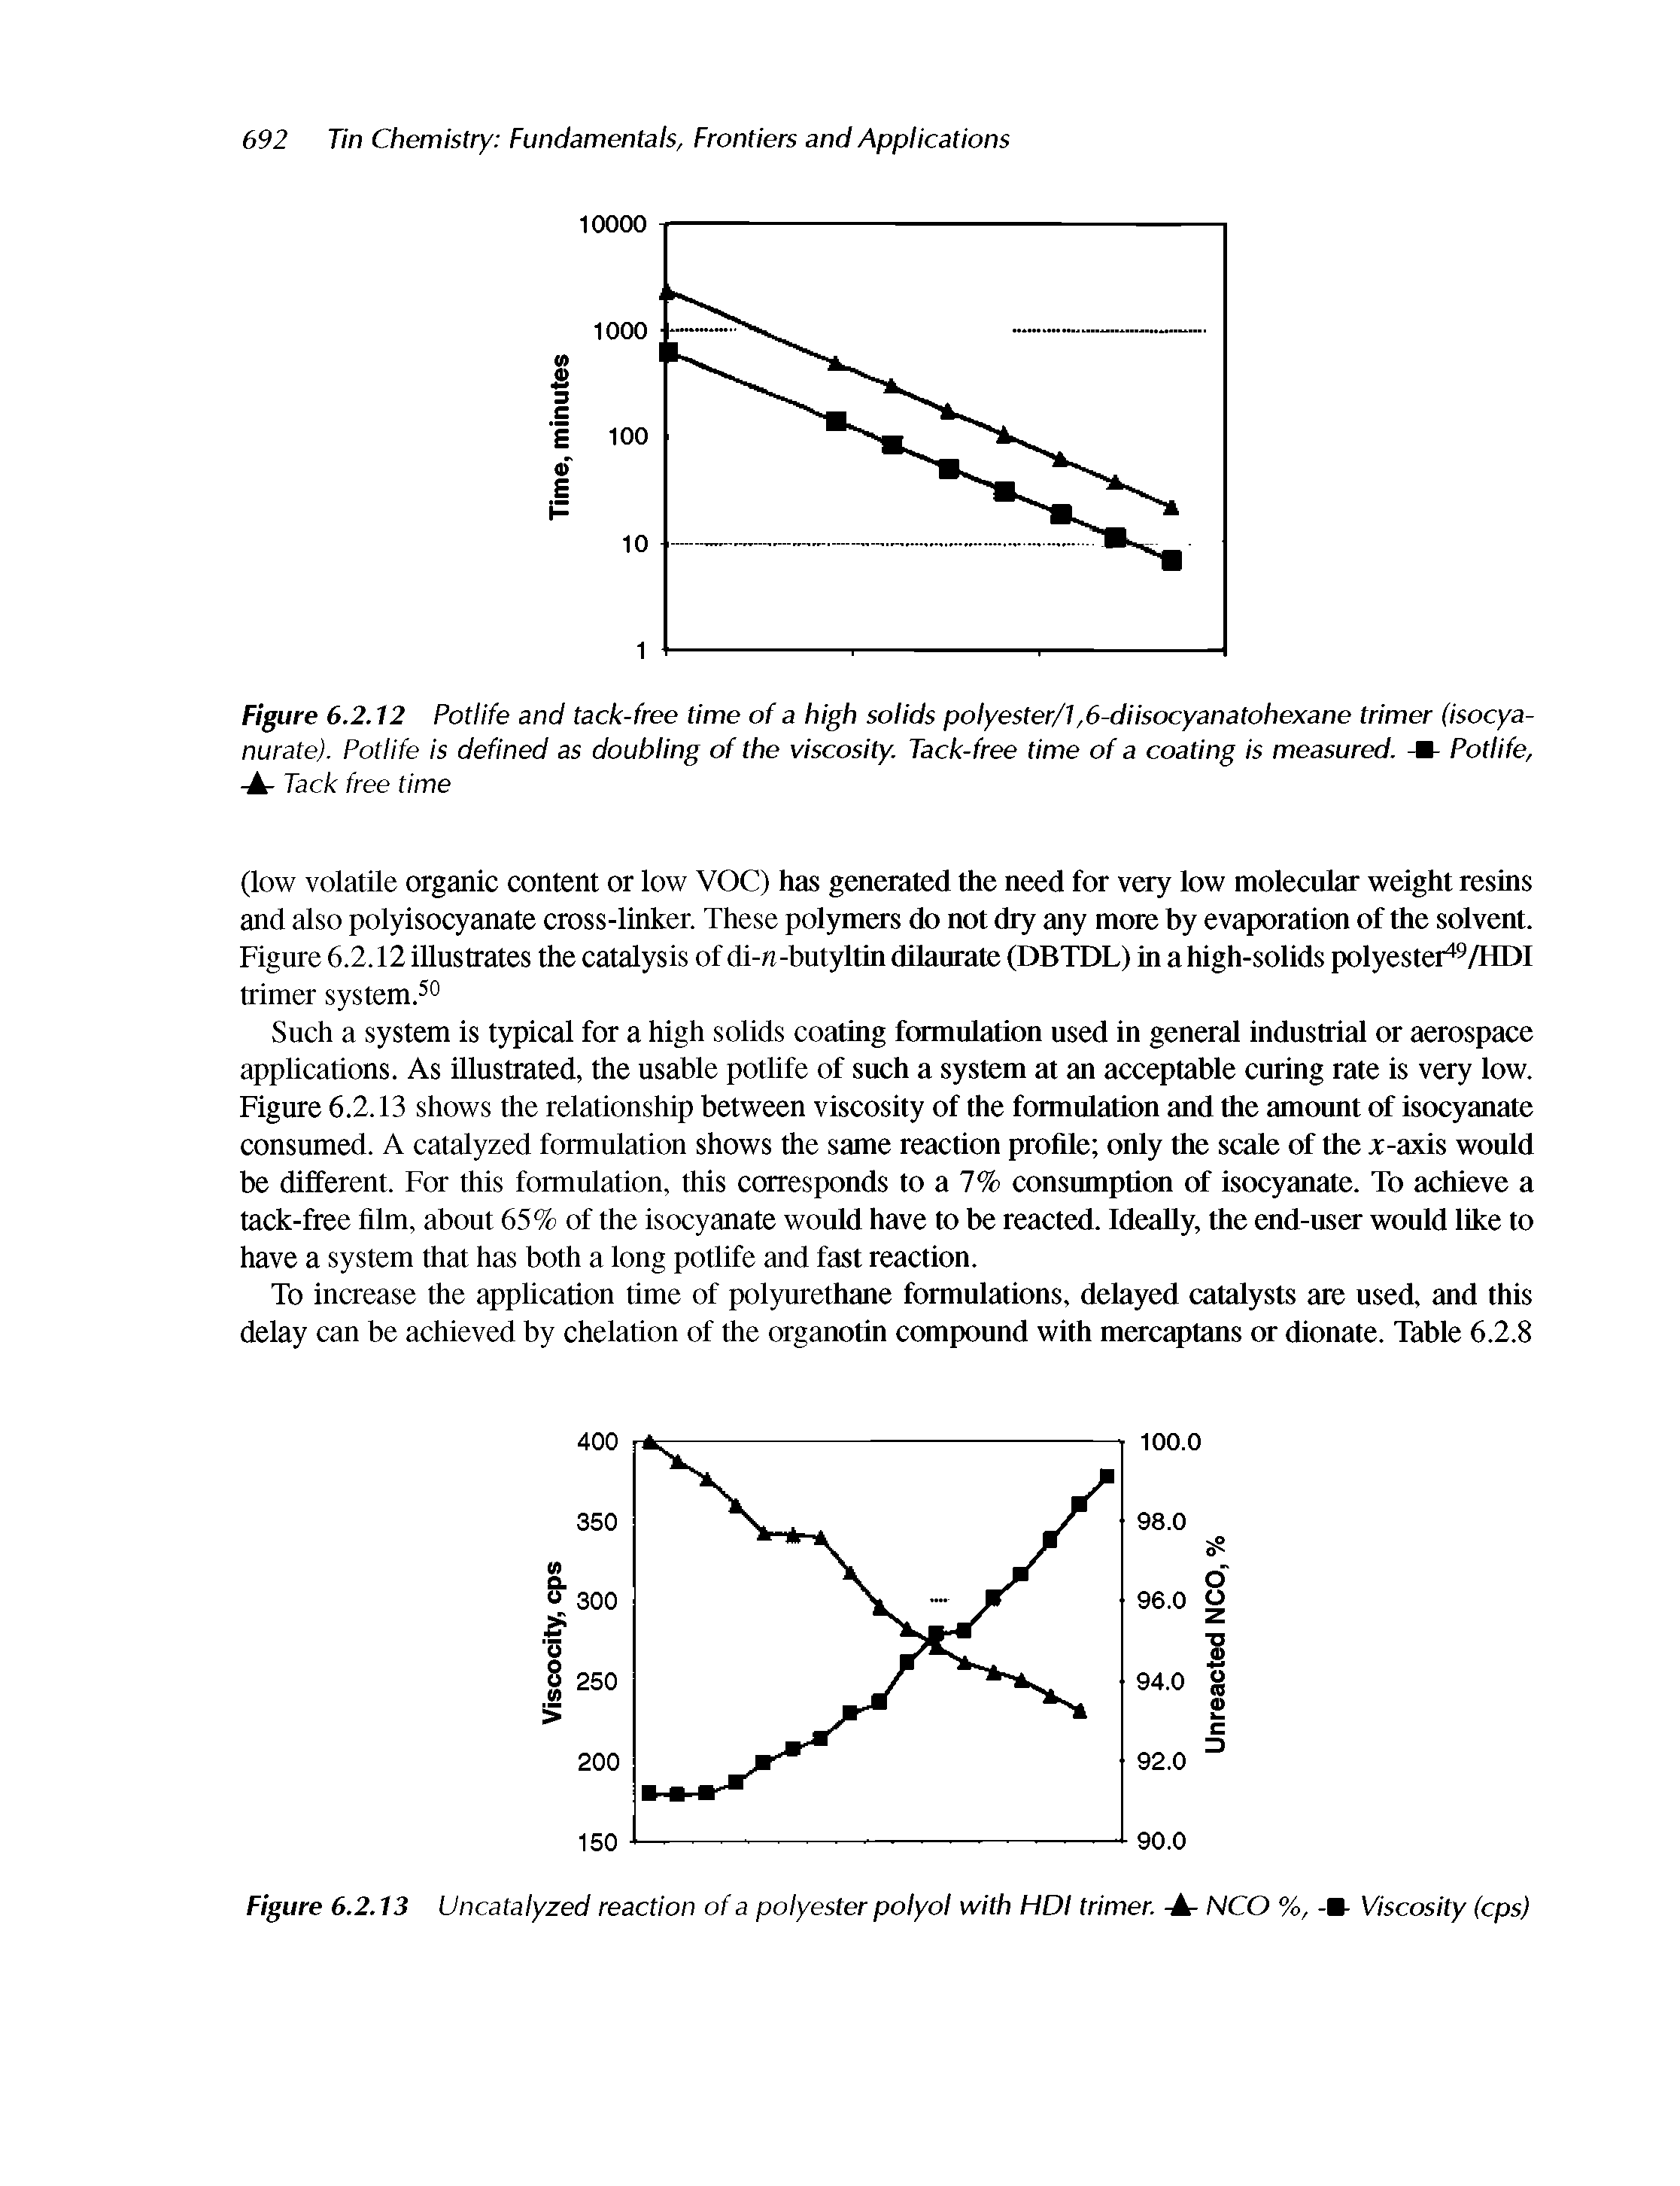 Figure 6.2.12 Potlife and tack-free time of a high solids polyester/1,6-diisocyanatohexane trimer (isocya-nurate). Potlife is defined as doubling of the viscosity. Tack-free time of a coating is measured. Potlife,...